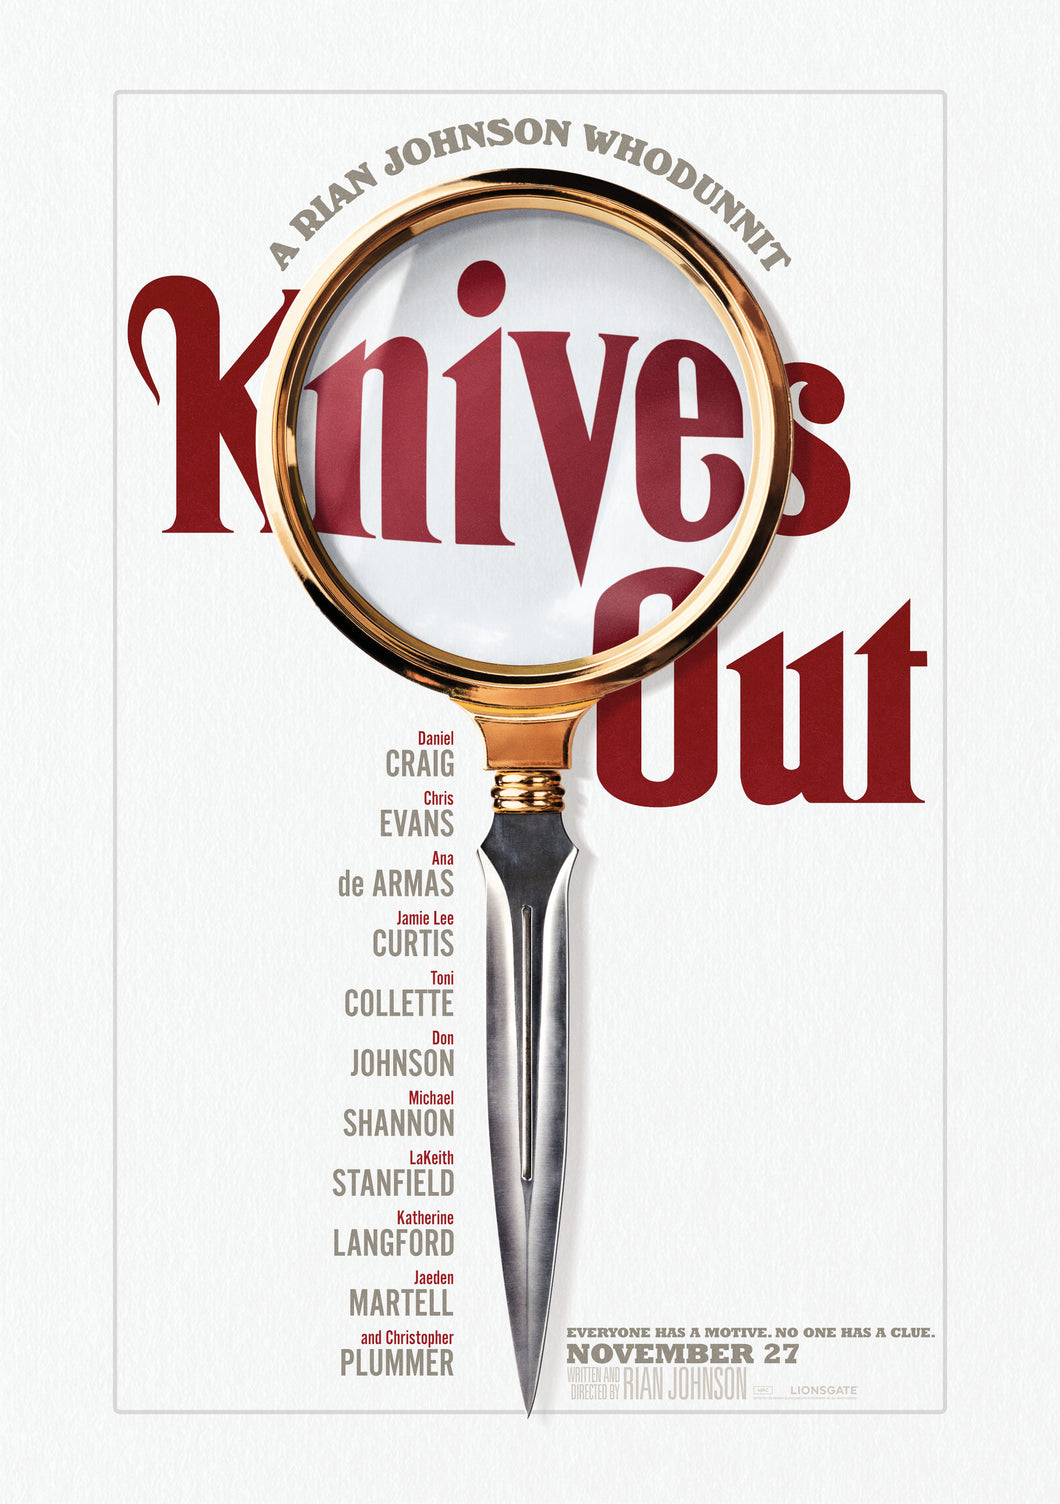 Poster Pelicula Knives Out